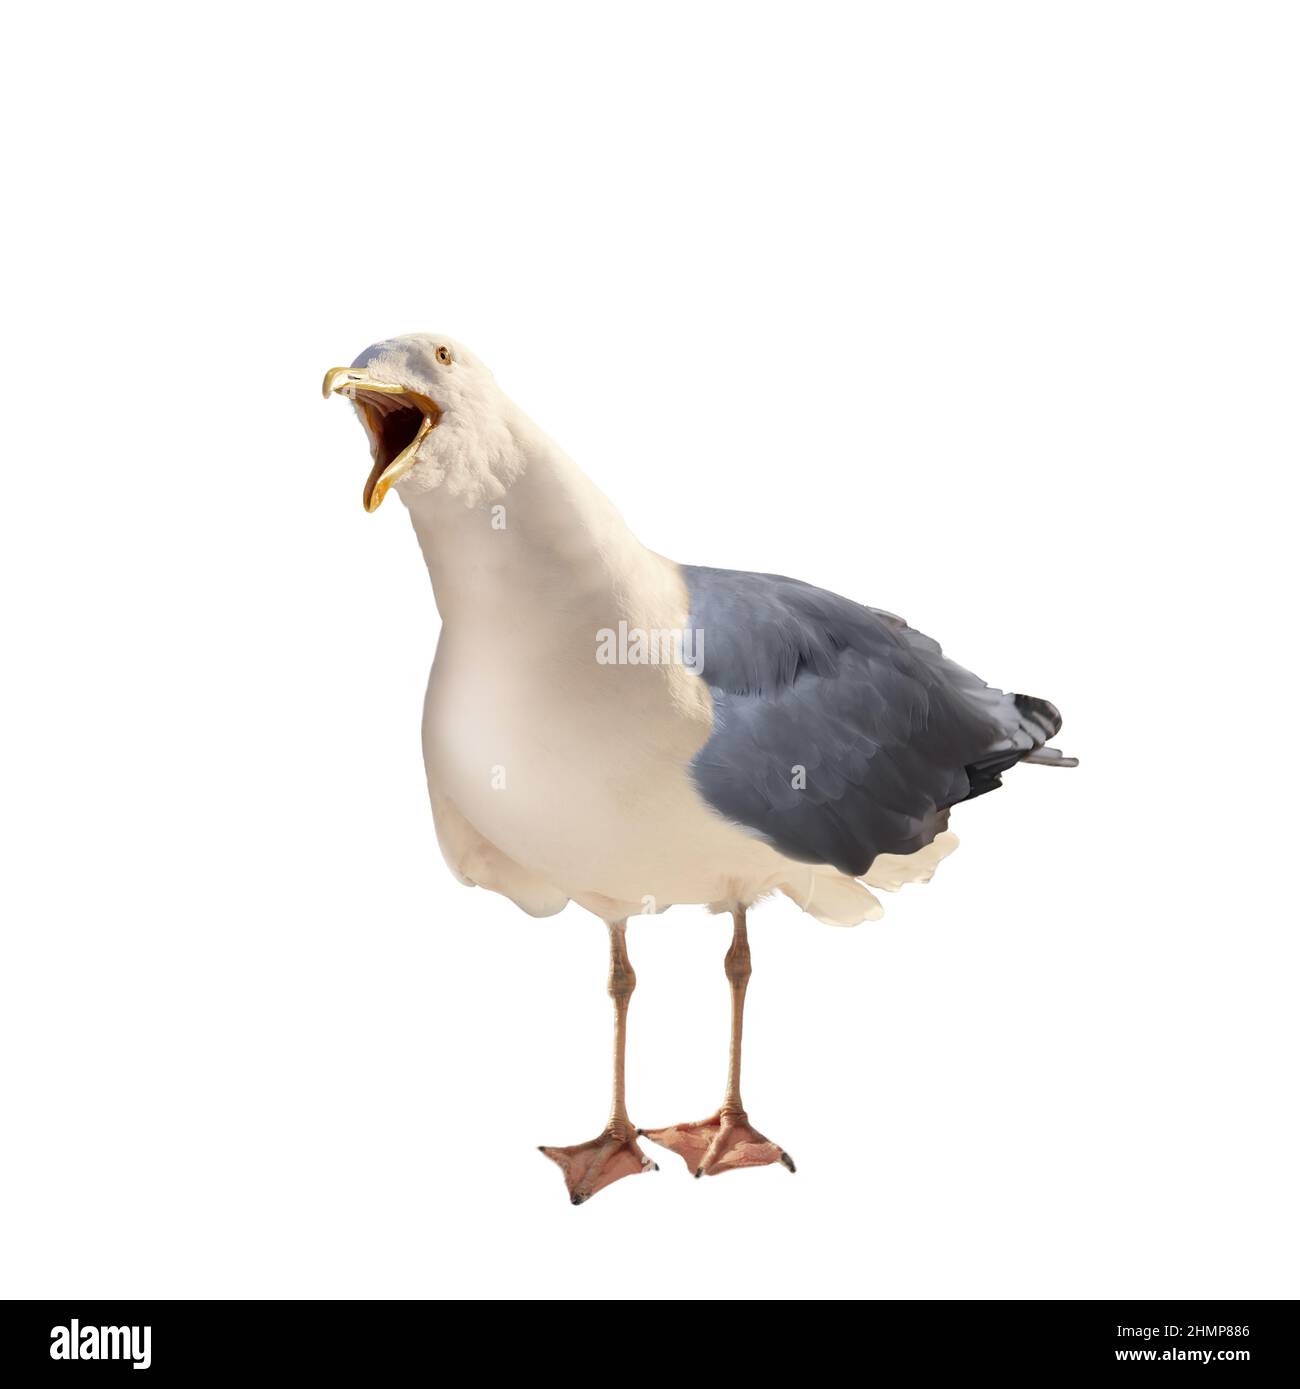 Live wild seagull in full growth with open beak on a white background Stock Photo